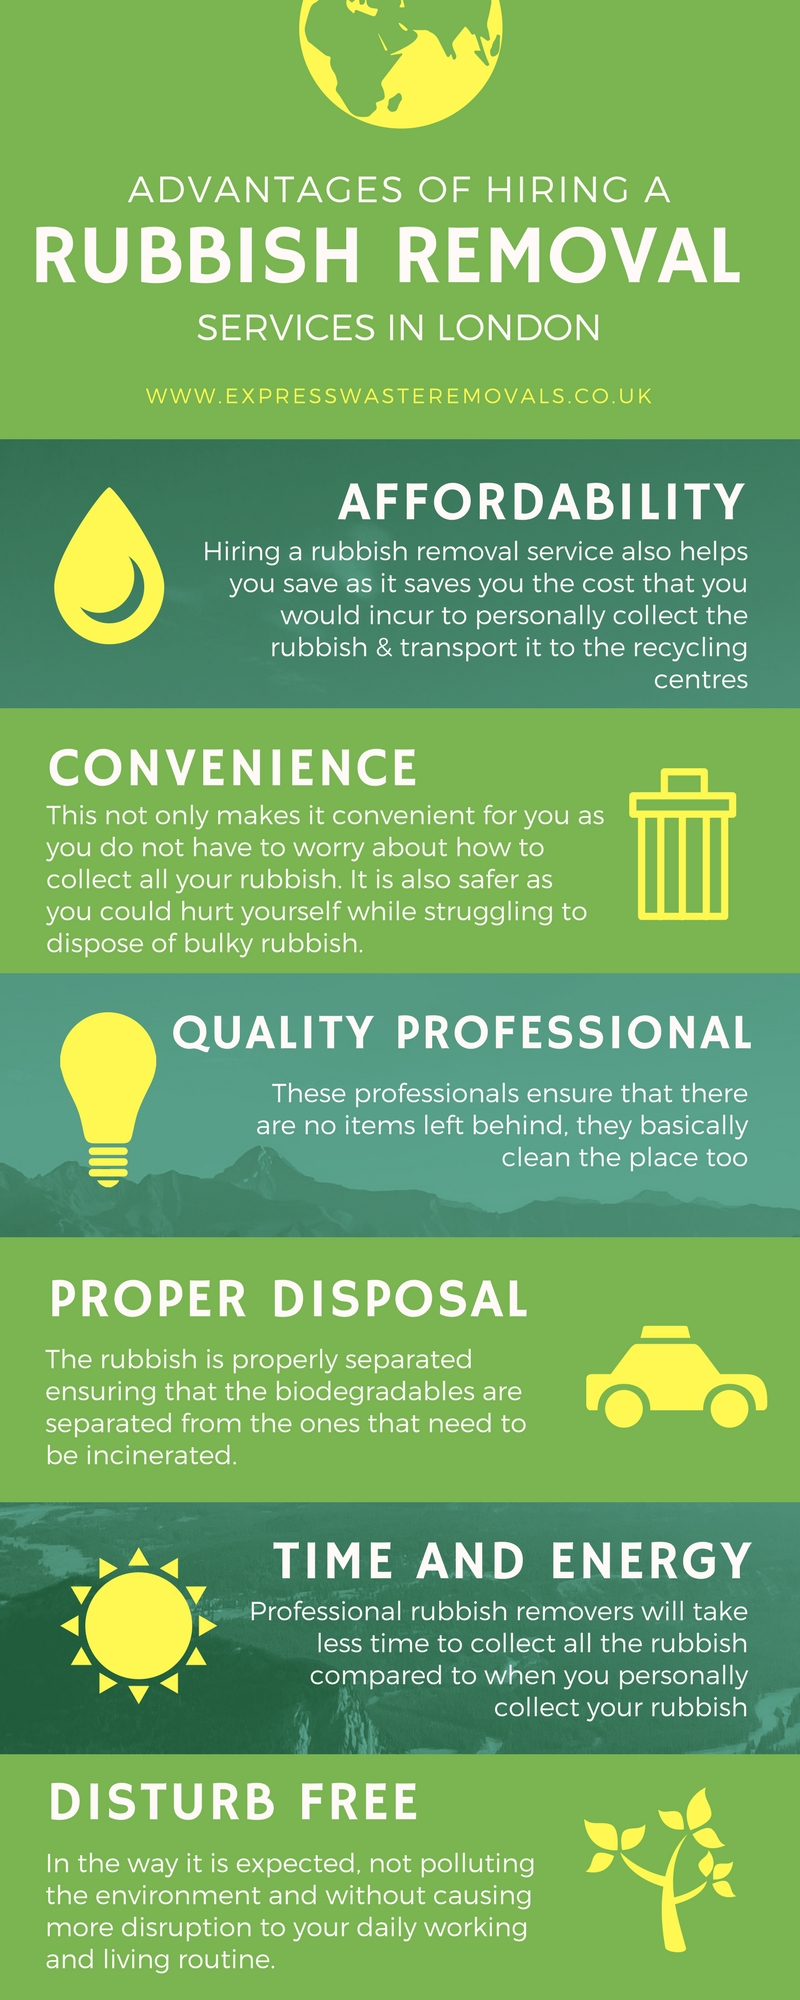 Express-Waste-Removals-Infographic